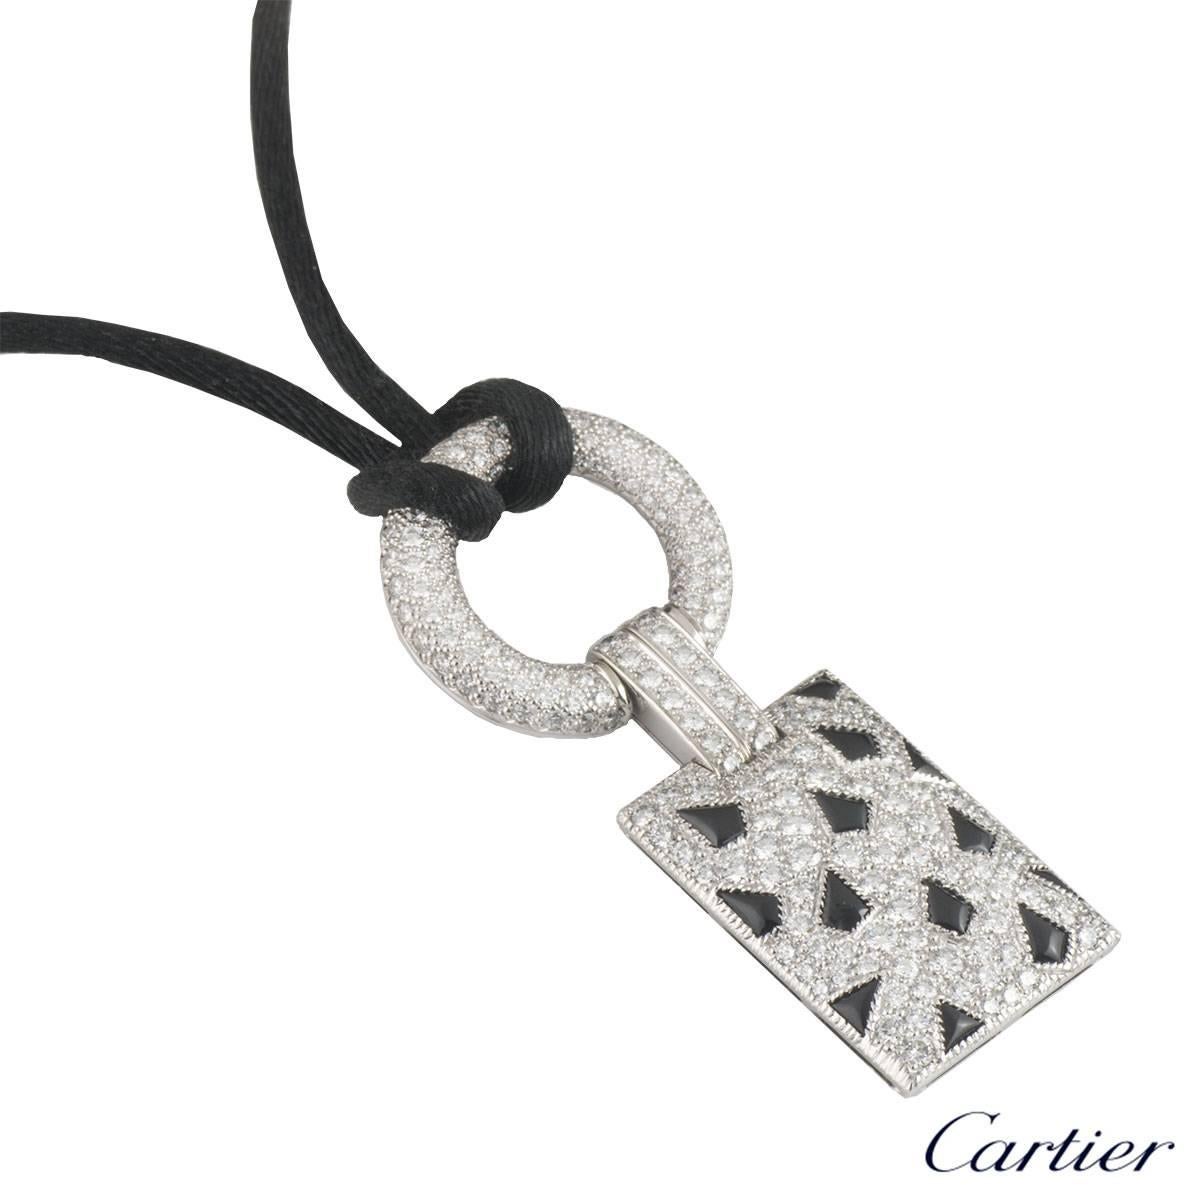 A stunning 18k white gold Cartier necklace from the Panthere de Cartier collection. The necklace comprises of a diamond set circular motif with a bar link connecting to a rectangular diamond and onyx set panels. The round brilliant cut diamonds